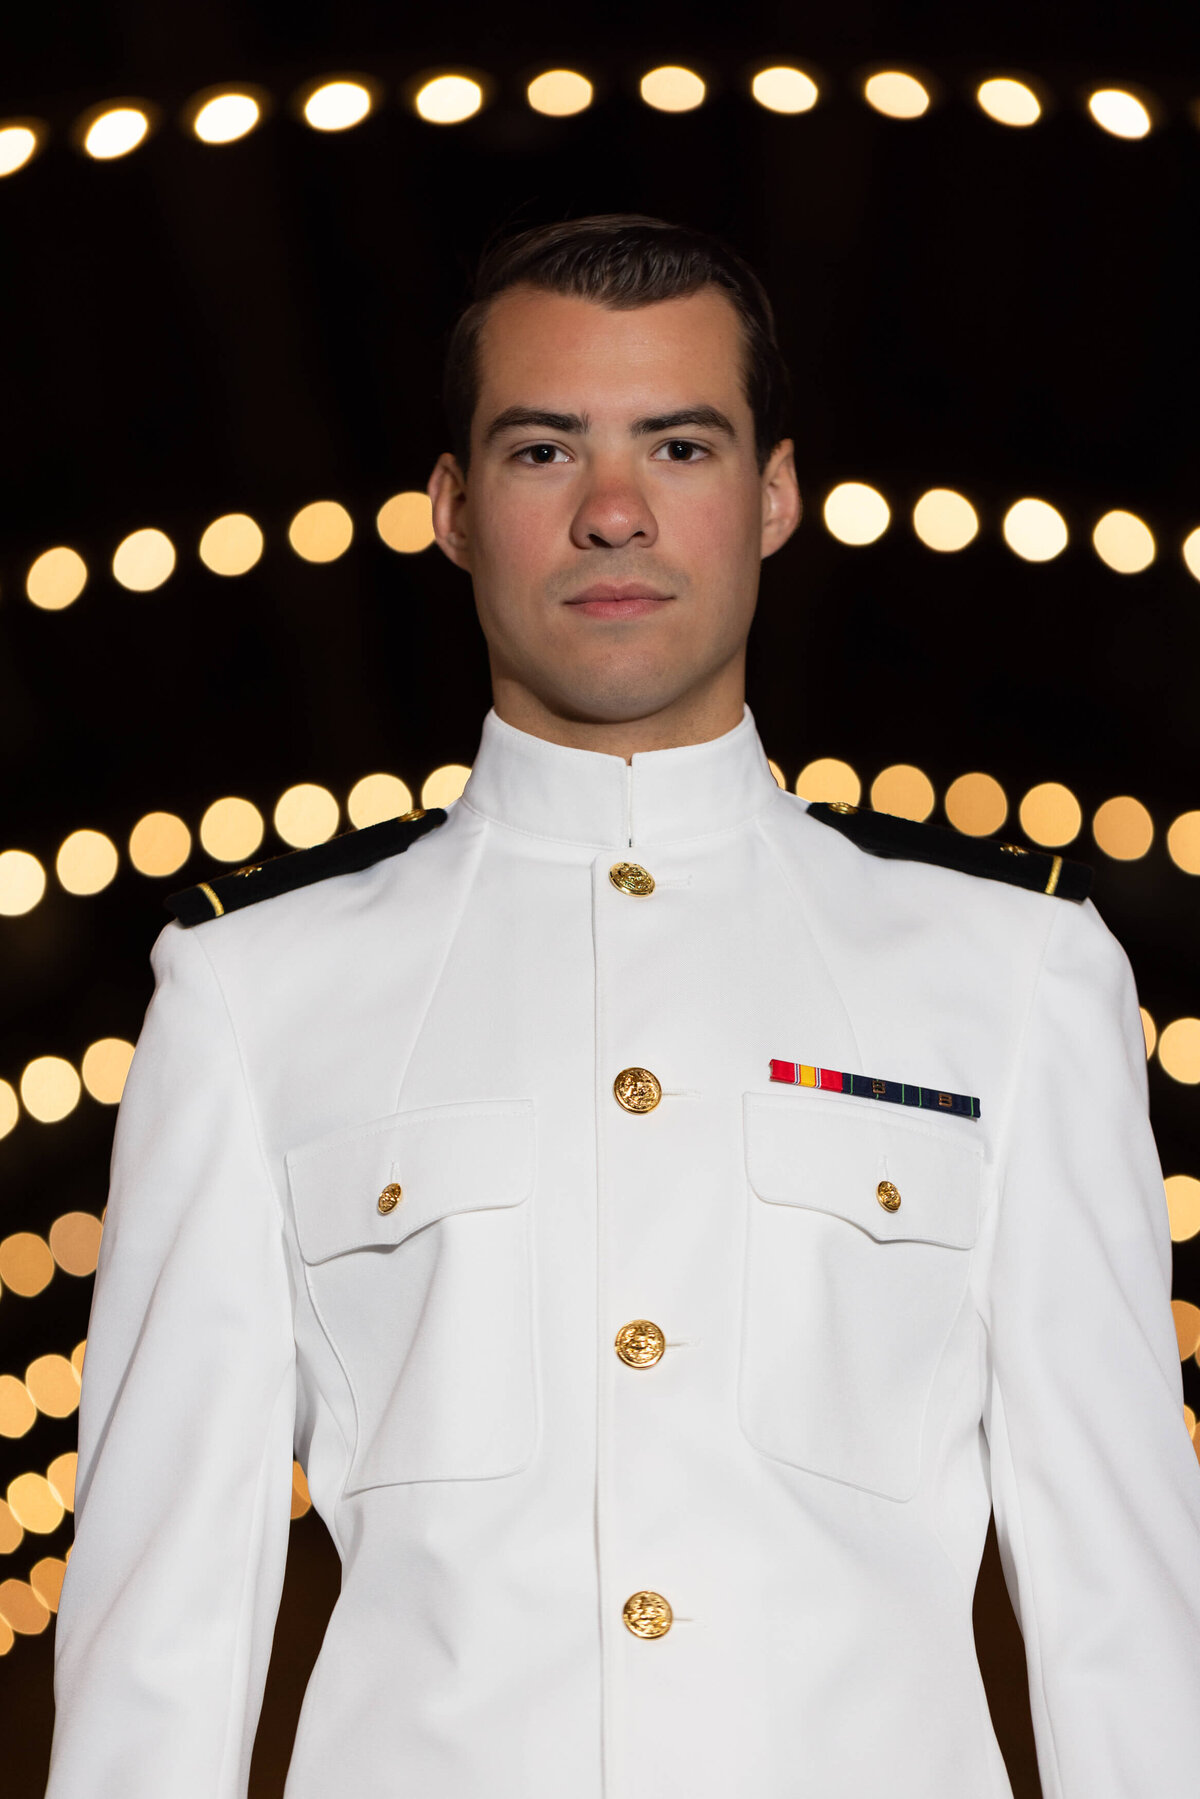 US Navy Officer in Dhalgren Hall lights in white uniform for senior photography in Annapolis, Maryland.